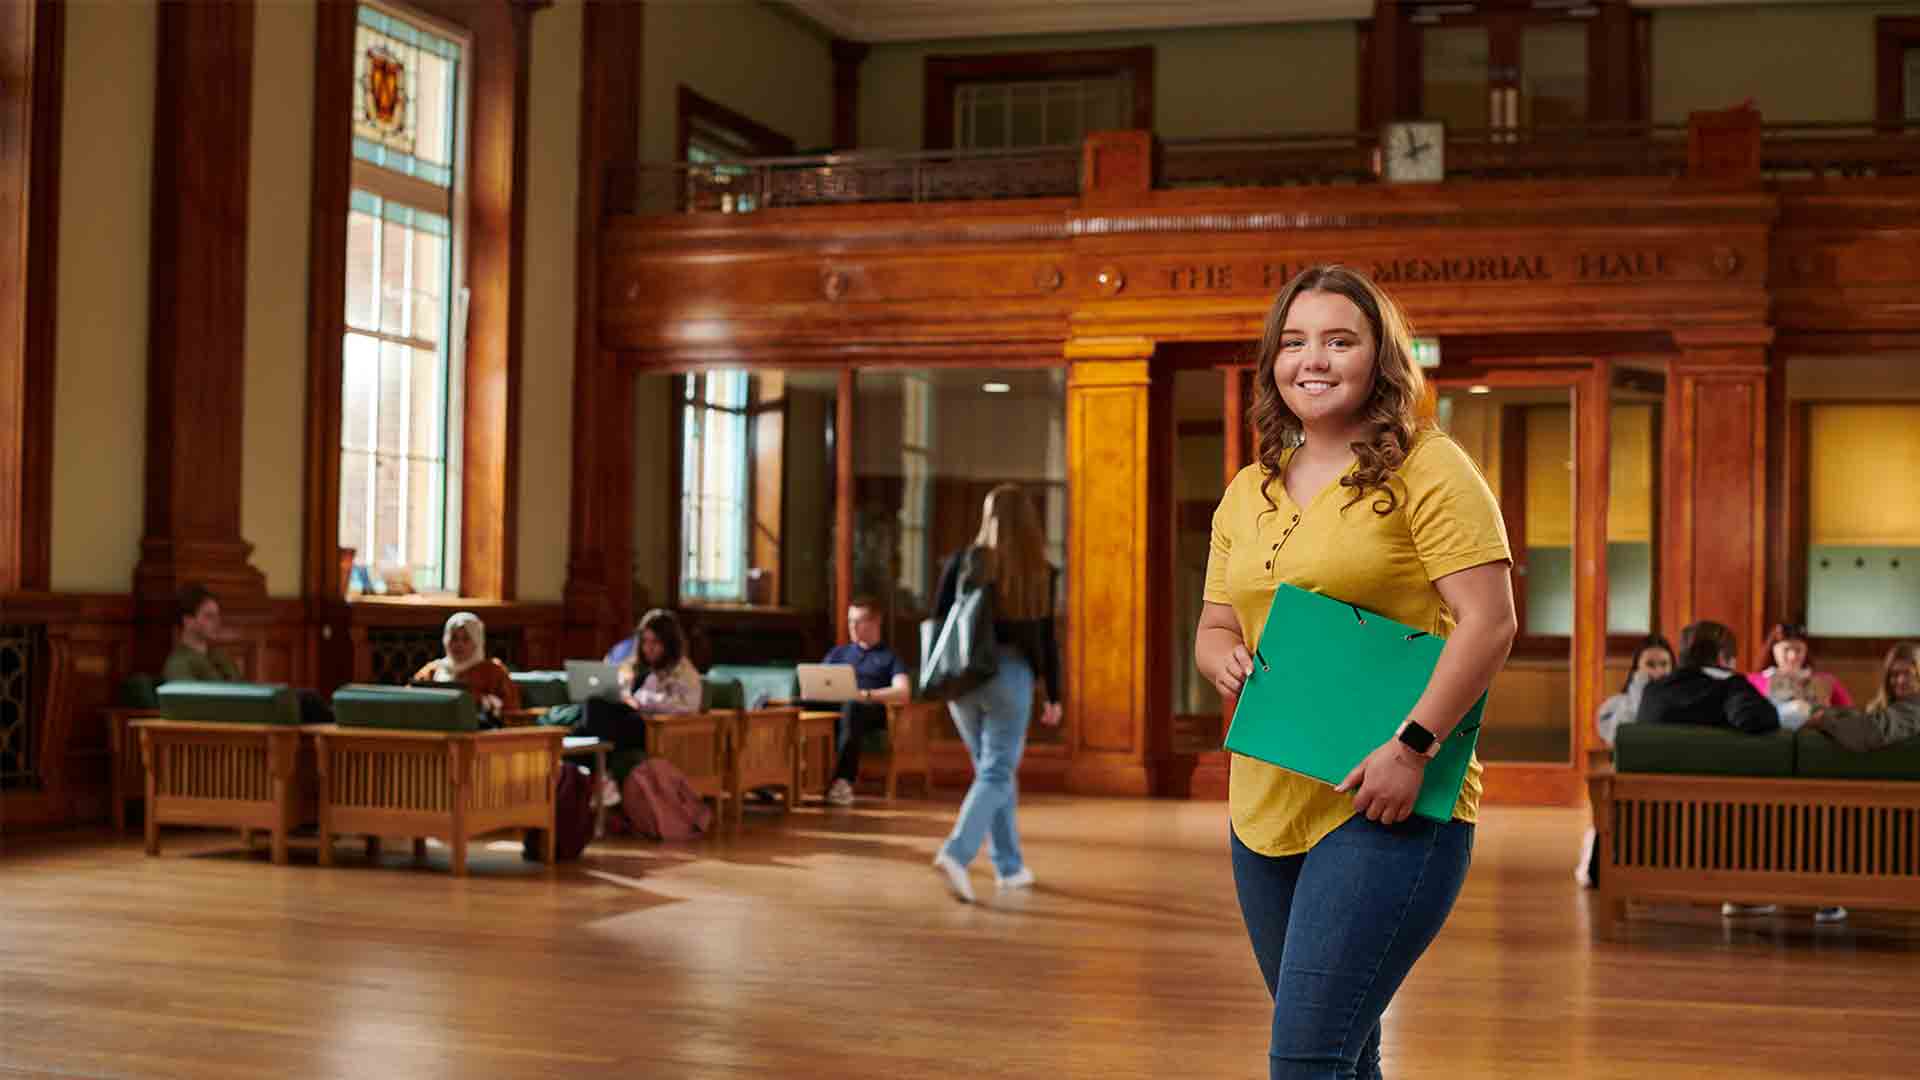 Female student stood in Hale Hall holding a green folder.